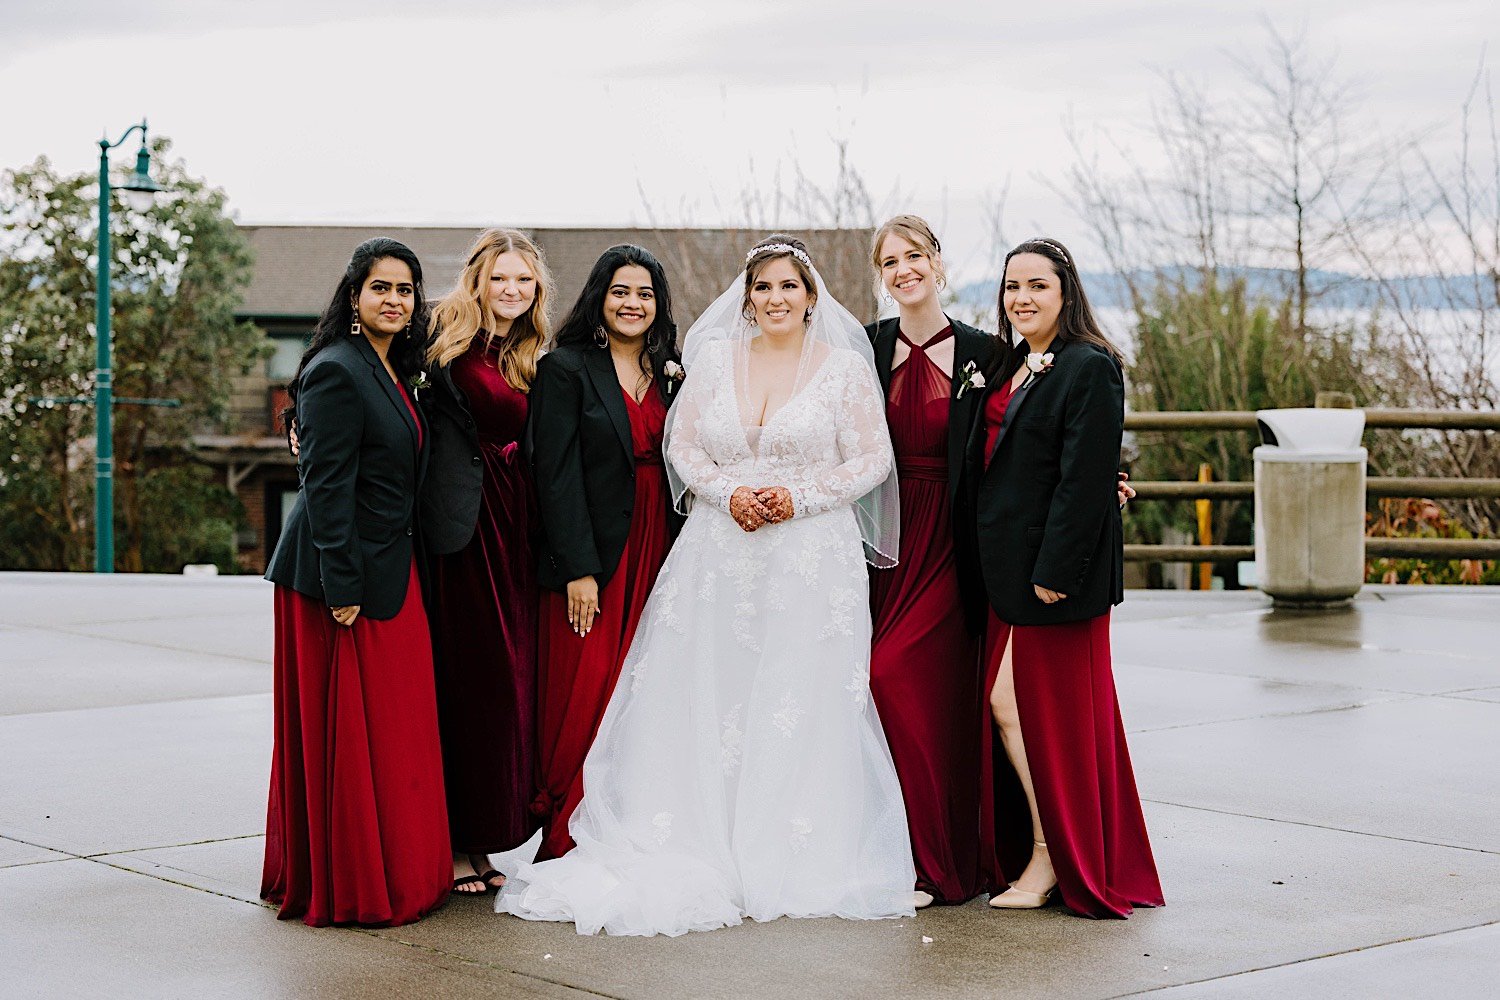 Bride and bridesmaids pose together and smile at the camera outside the Rosehill Community Center